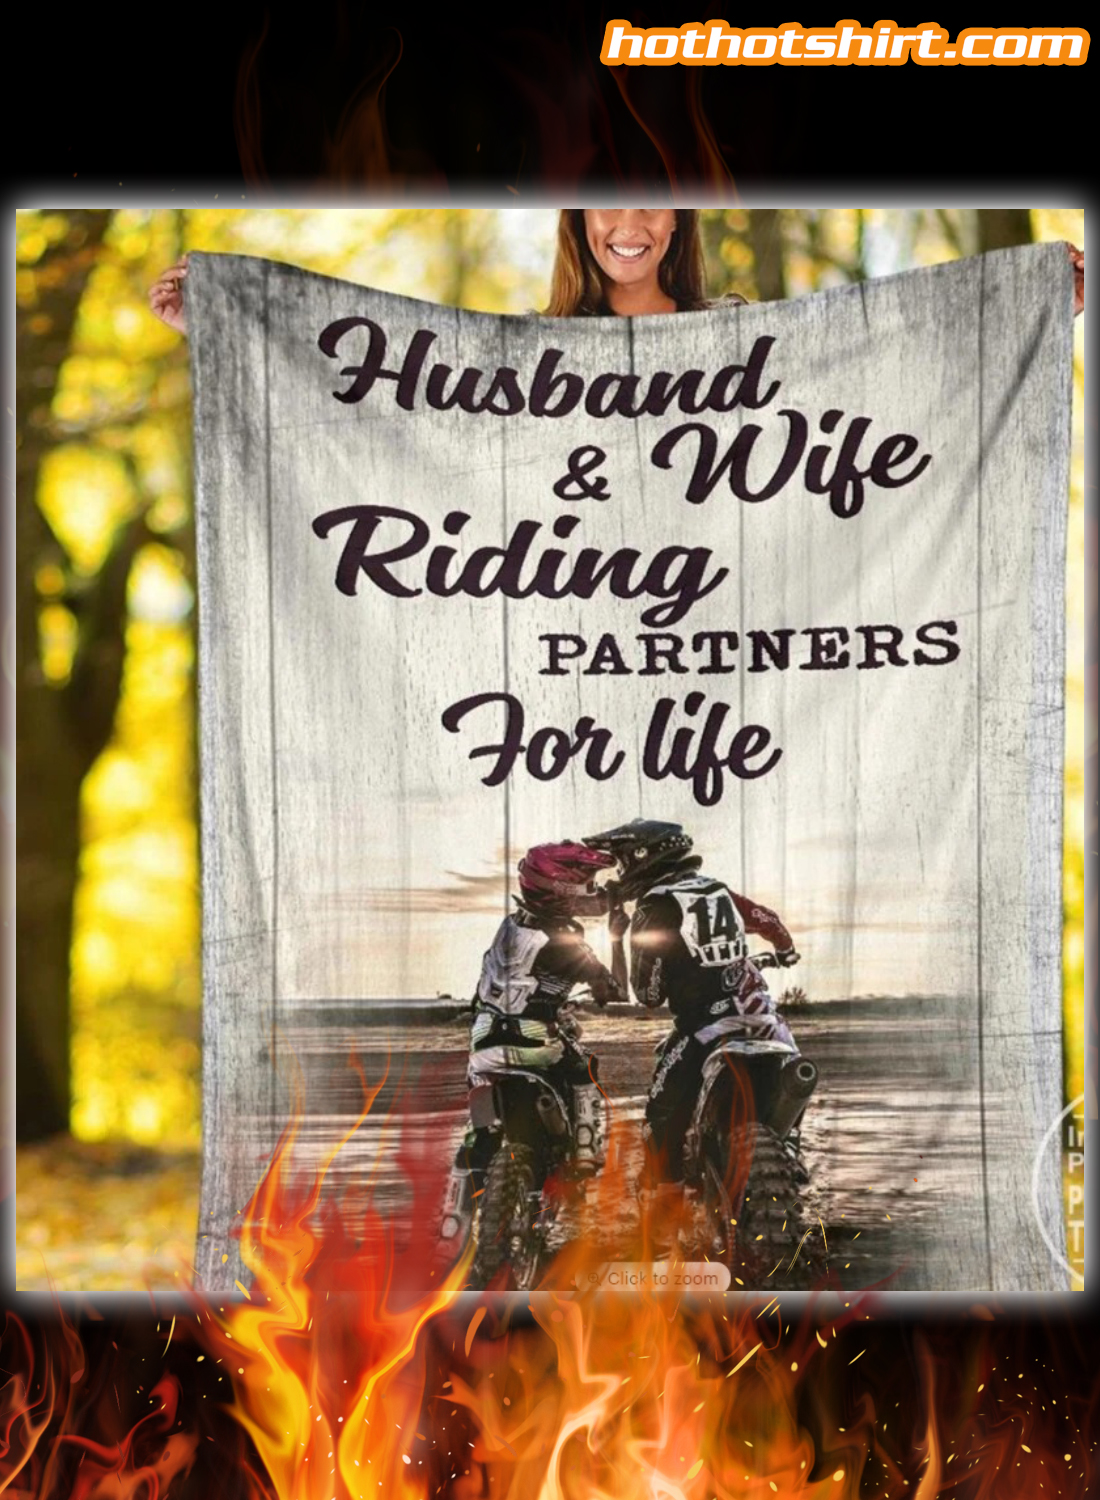 Motocross husband and wife riding partners for life blanket 1